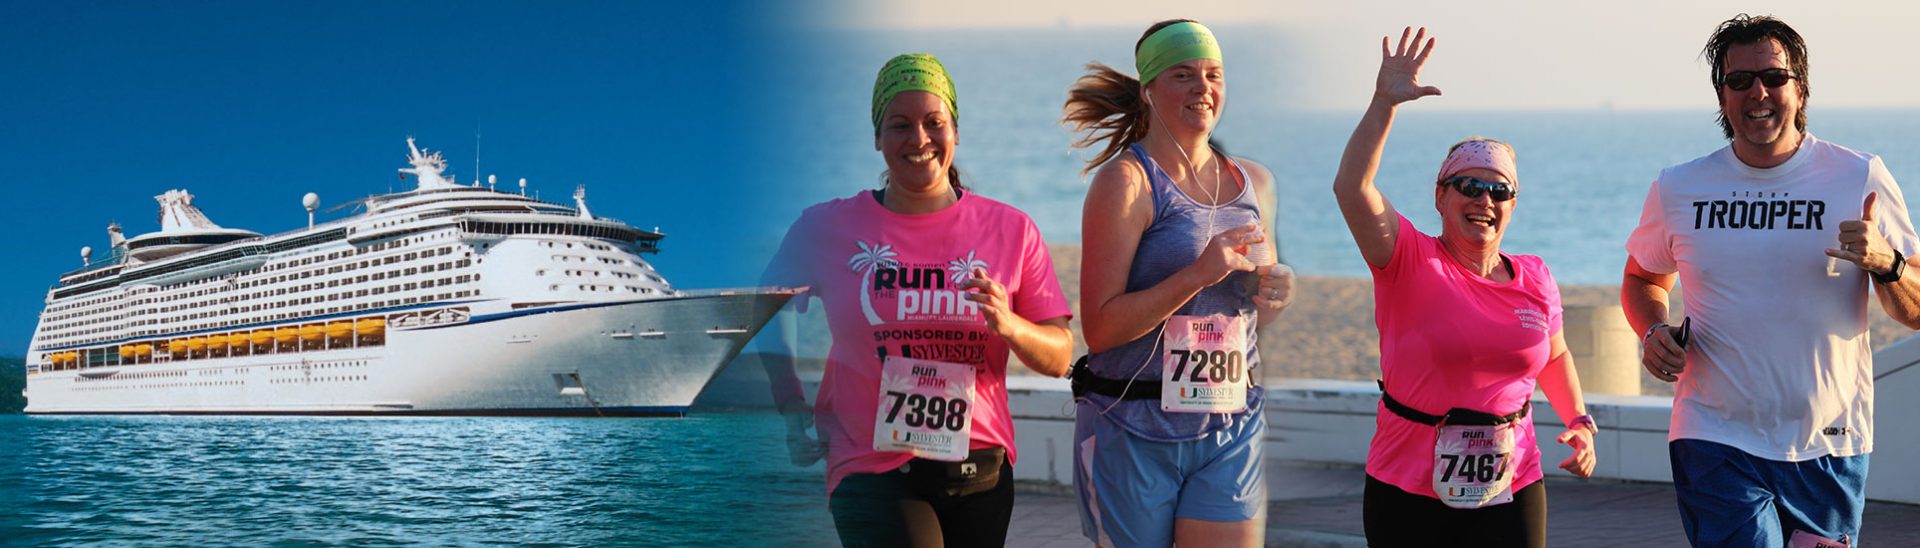 Running Vacation Races Run for Fun Cruise Tours